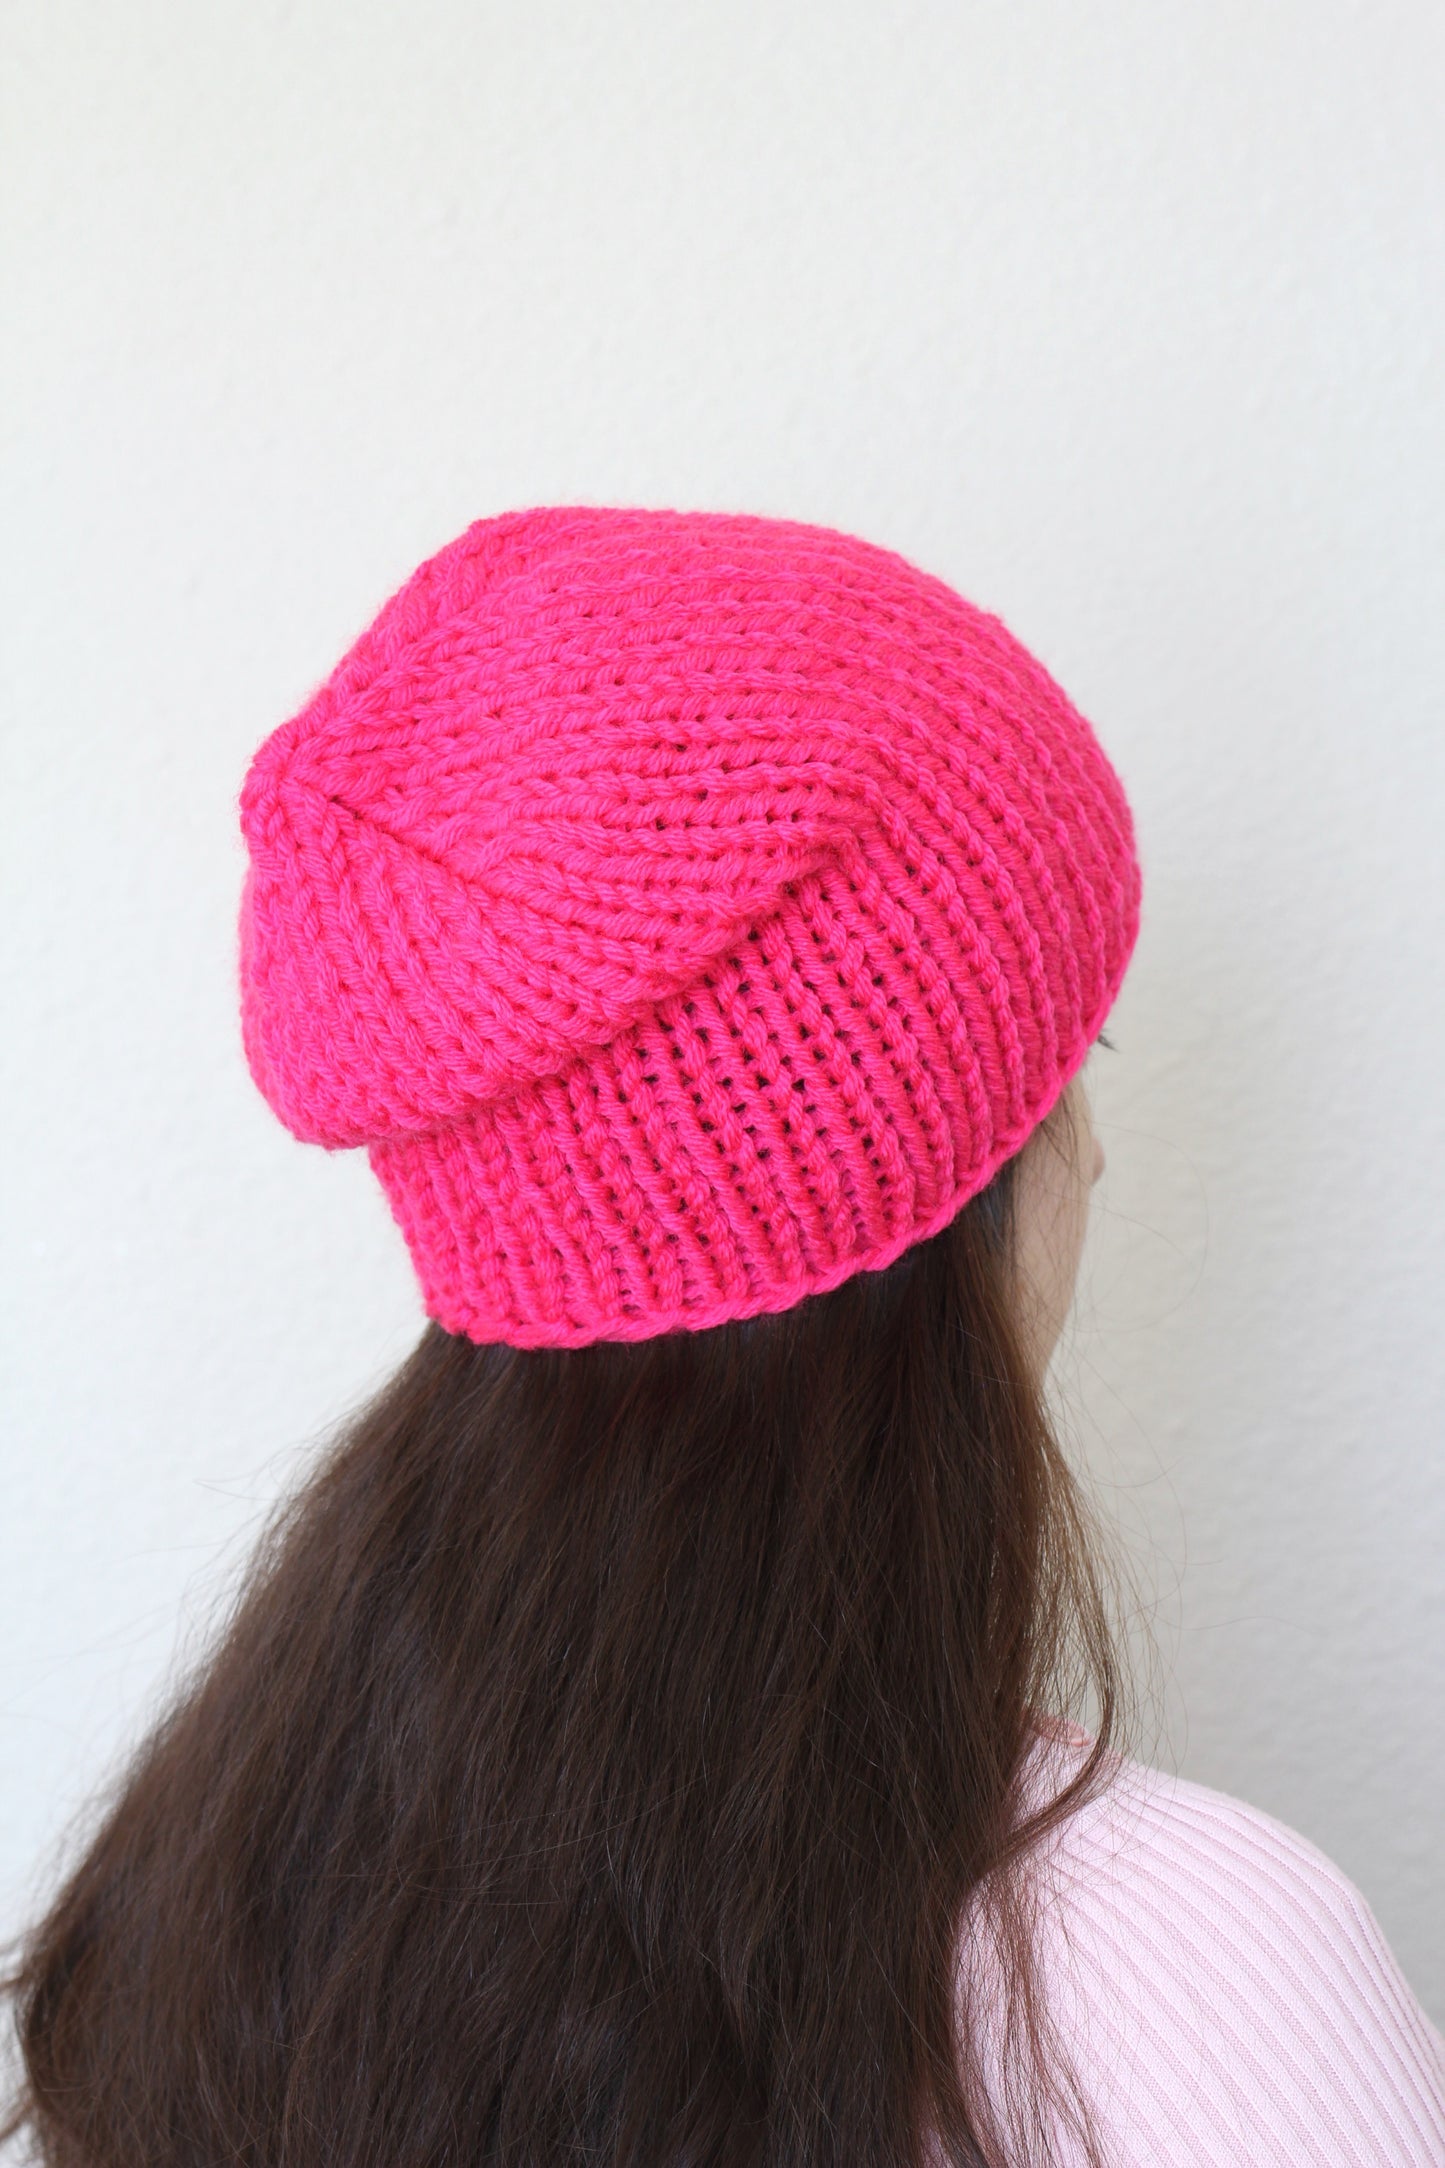 Beanie hat, knit hat, slouchy hat, knit beanie in honey yellow color